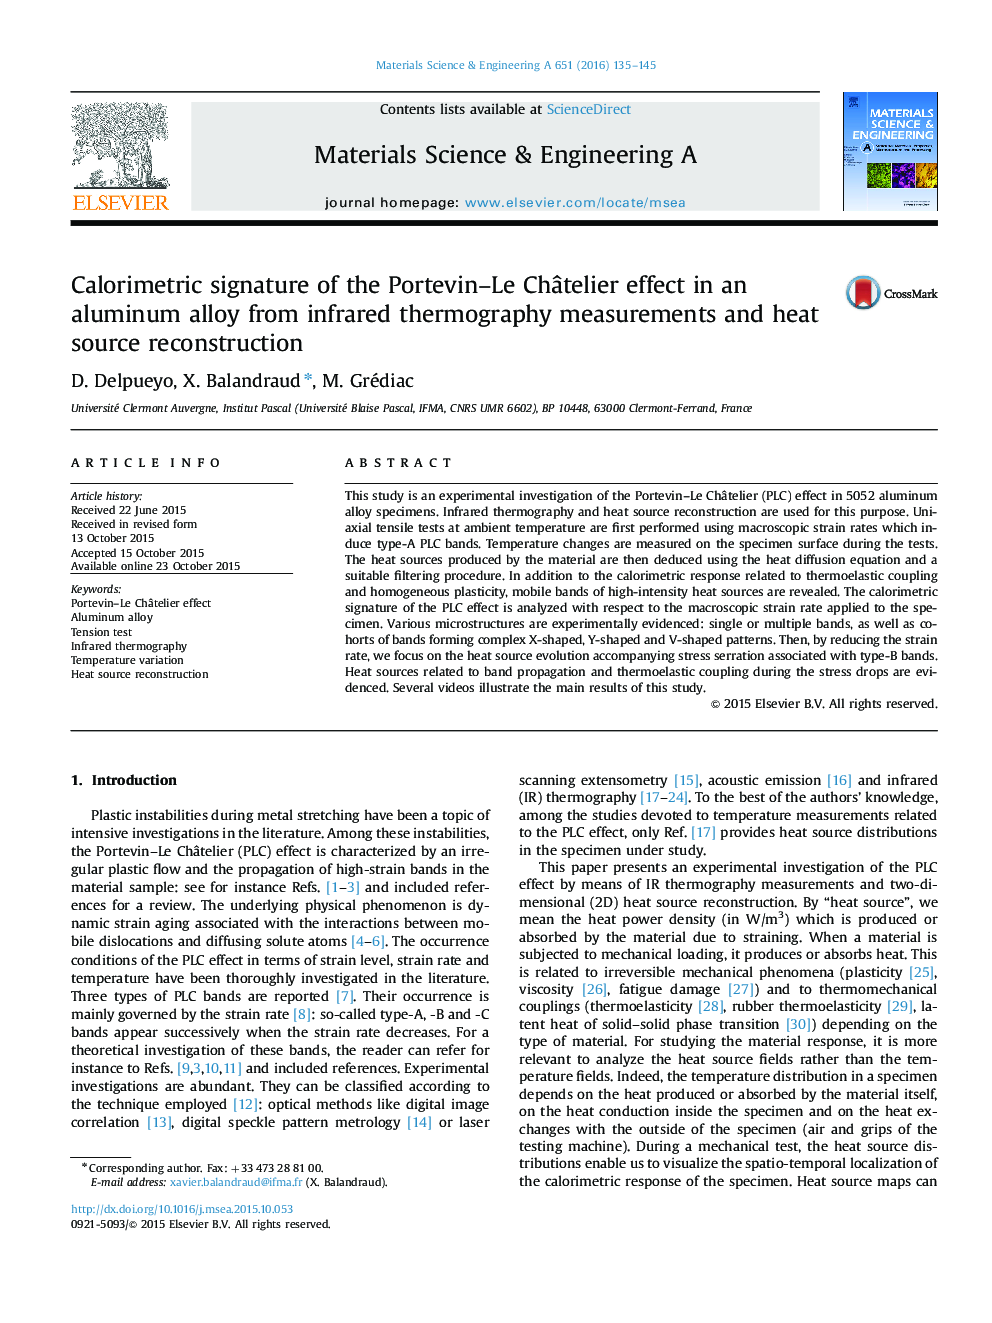 Calorimetric signature of the Portevin-Le ChÃ¢telier effect in an aluminum alloy from infrared thermography measurements and heat source reconstruction